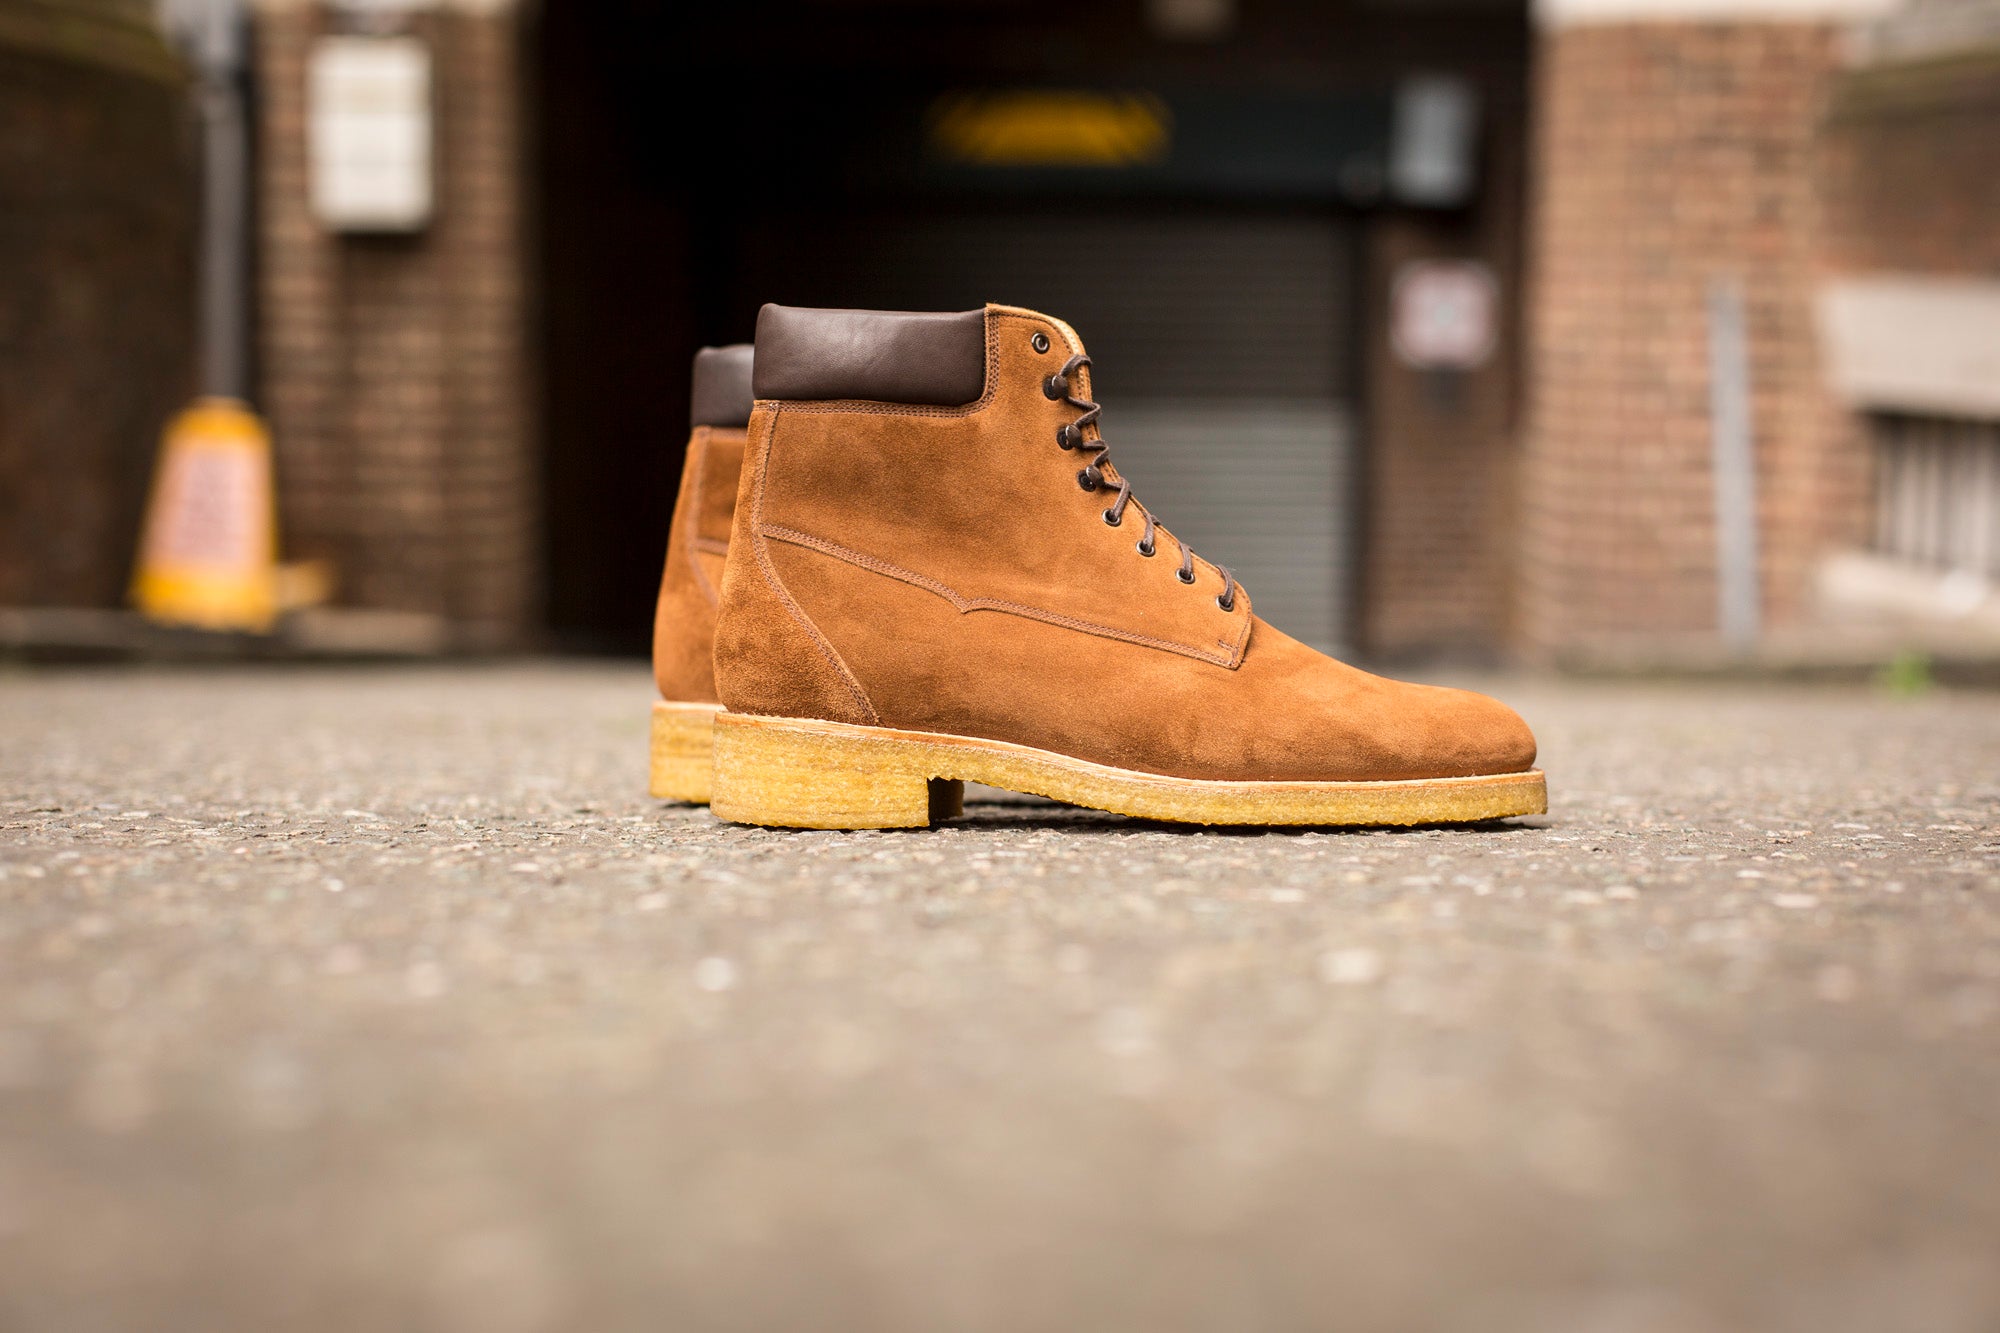 Whidbey - MTO - Snuff Suede - NJF Last - Crepe Rubber Sole